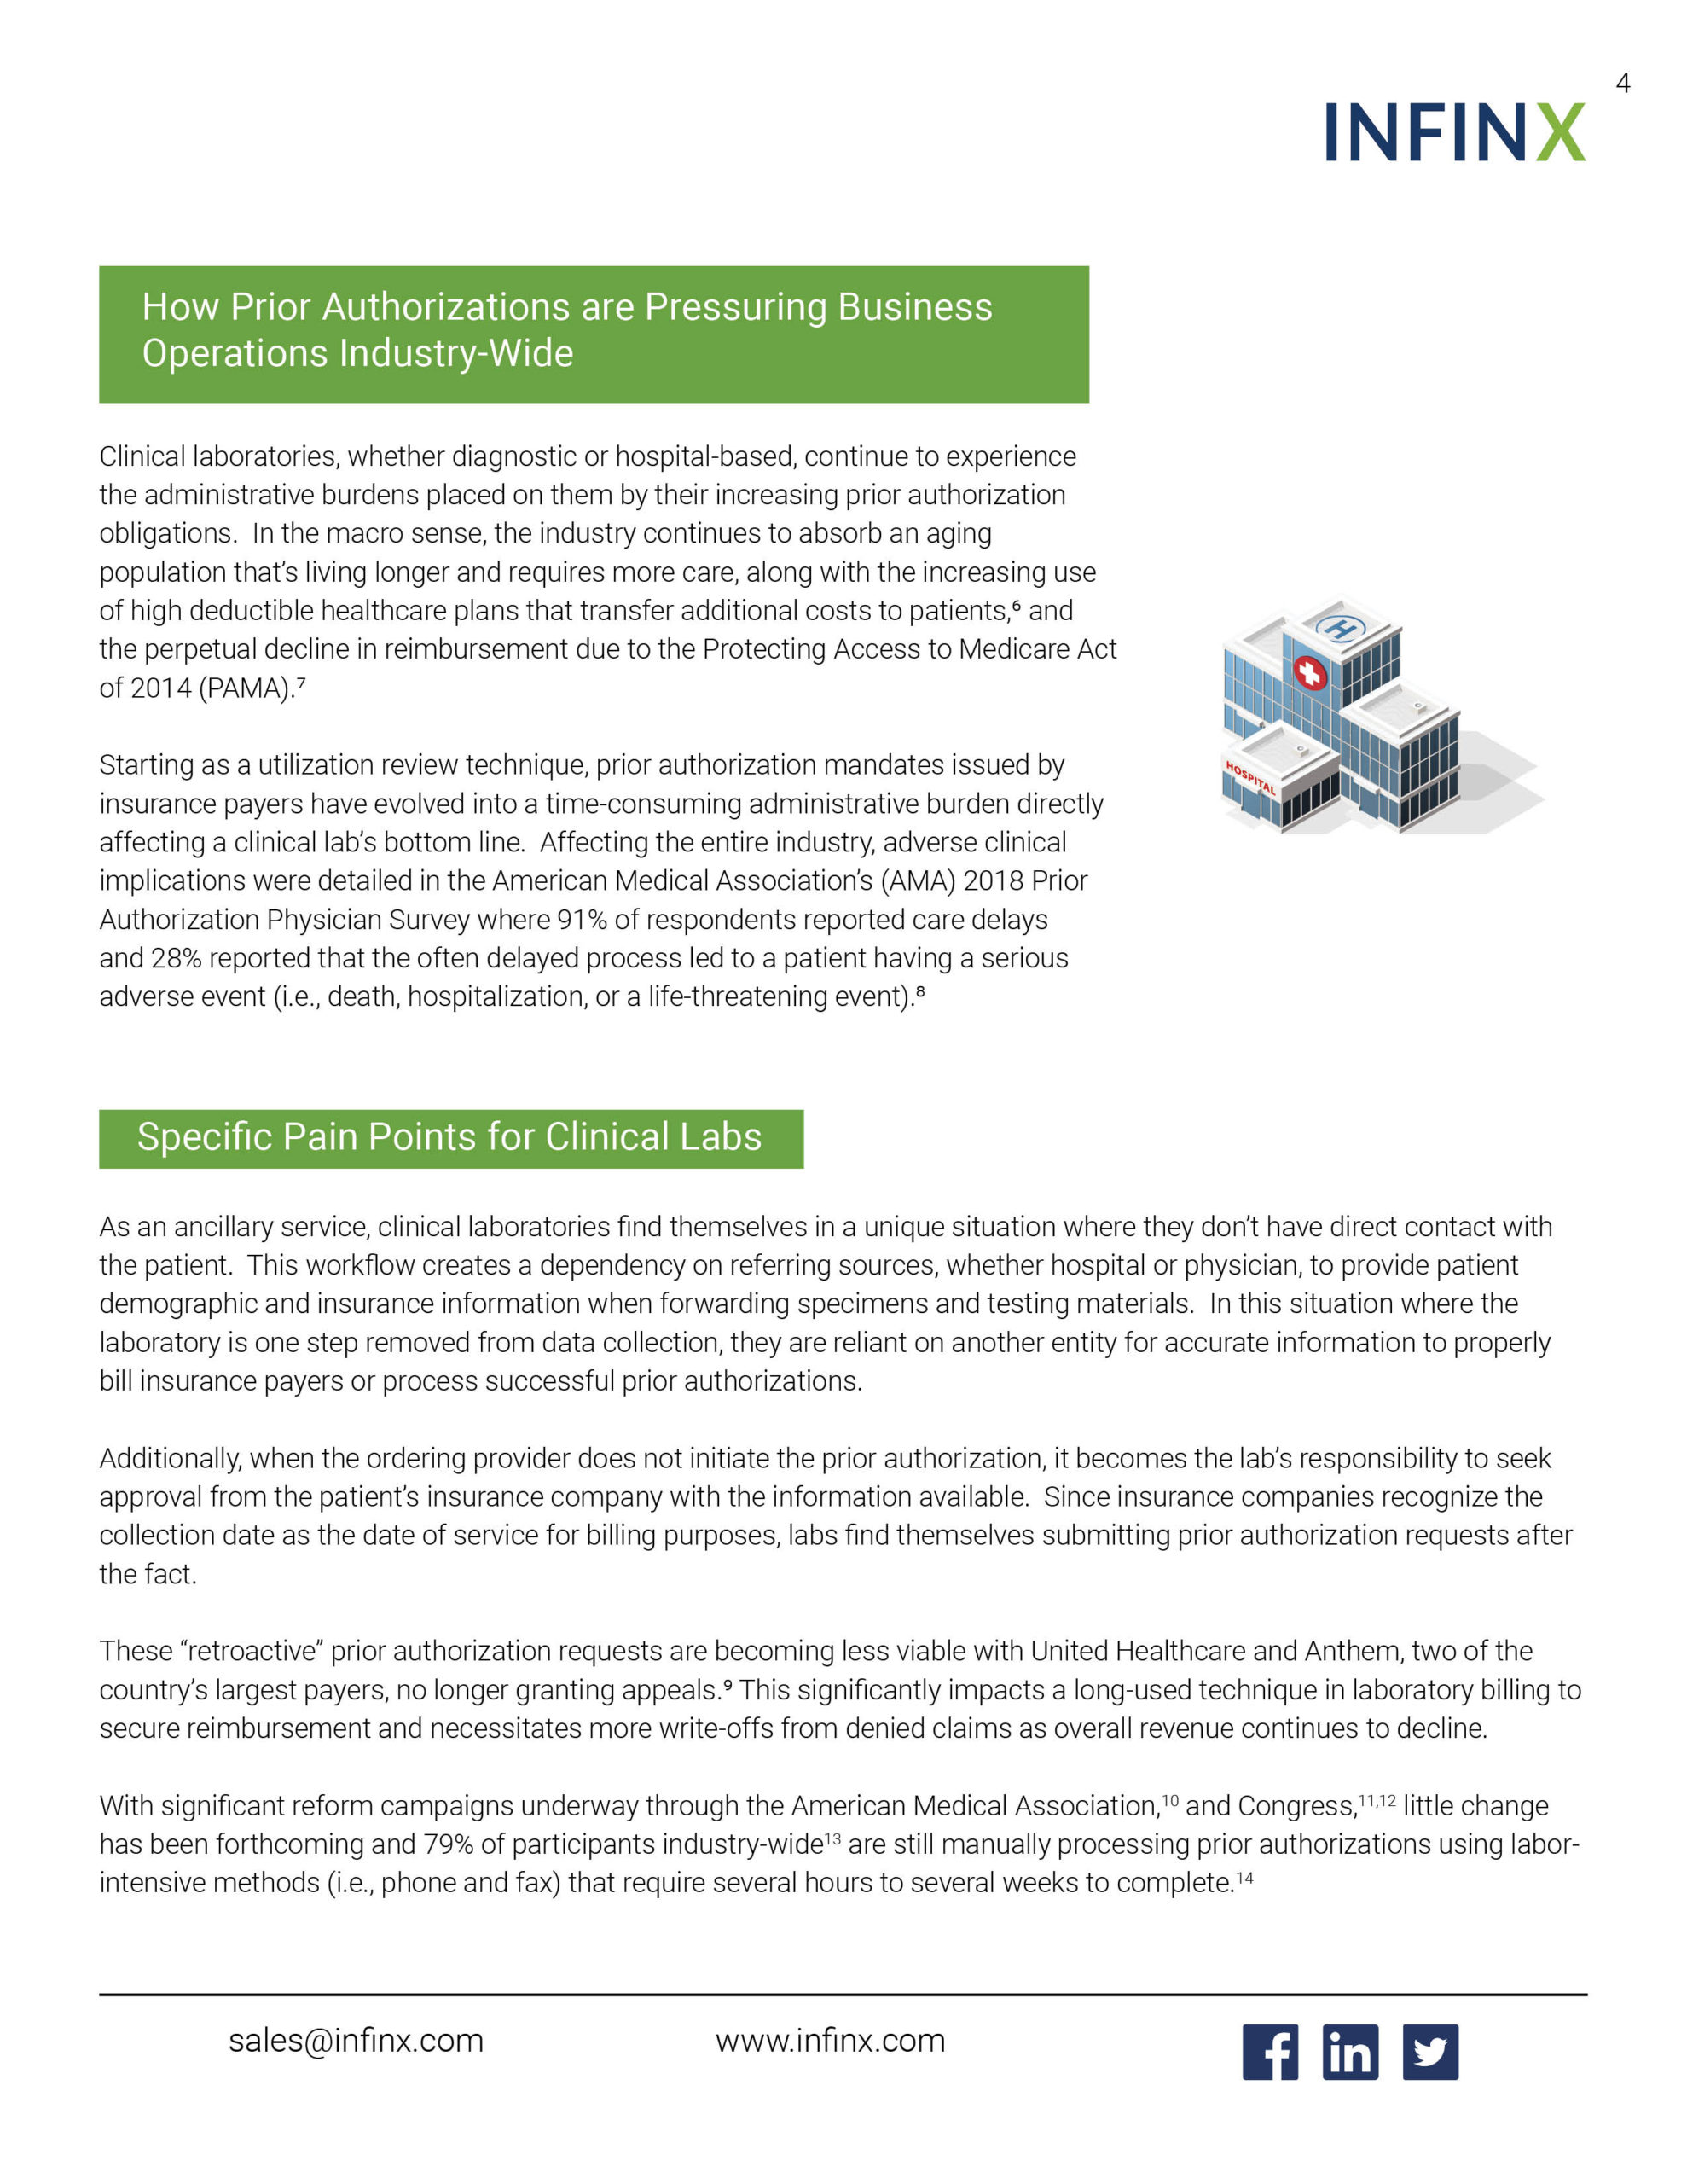 Infinx - White Paper - Reach Next-Level Prior Authorizations in Laboratory Using AI and Automation June2021 4